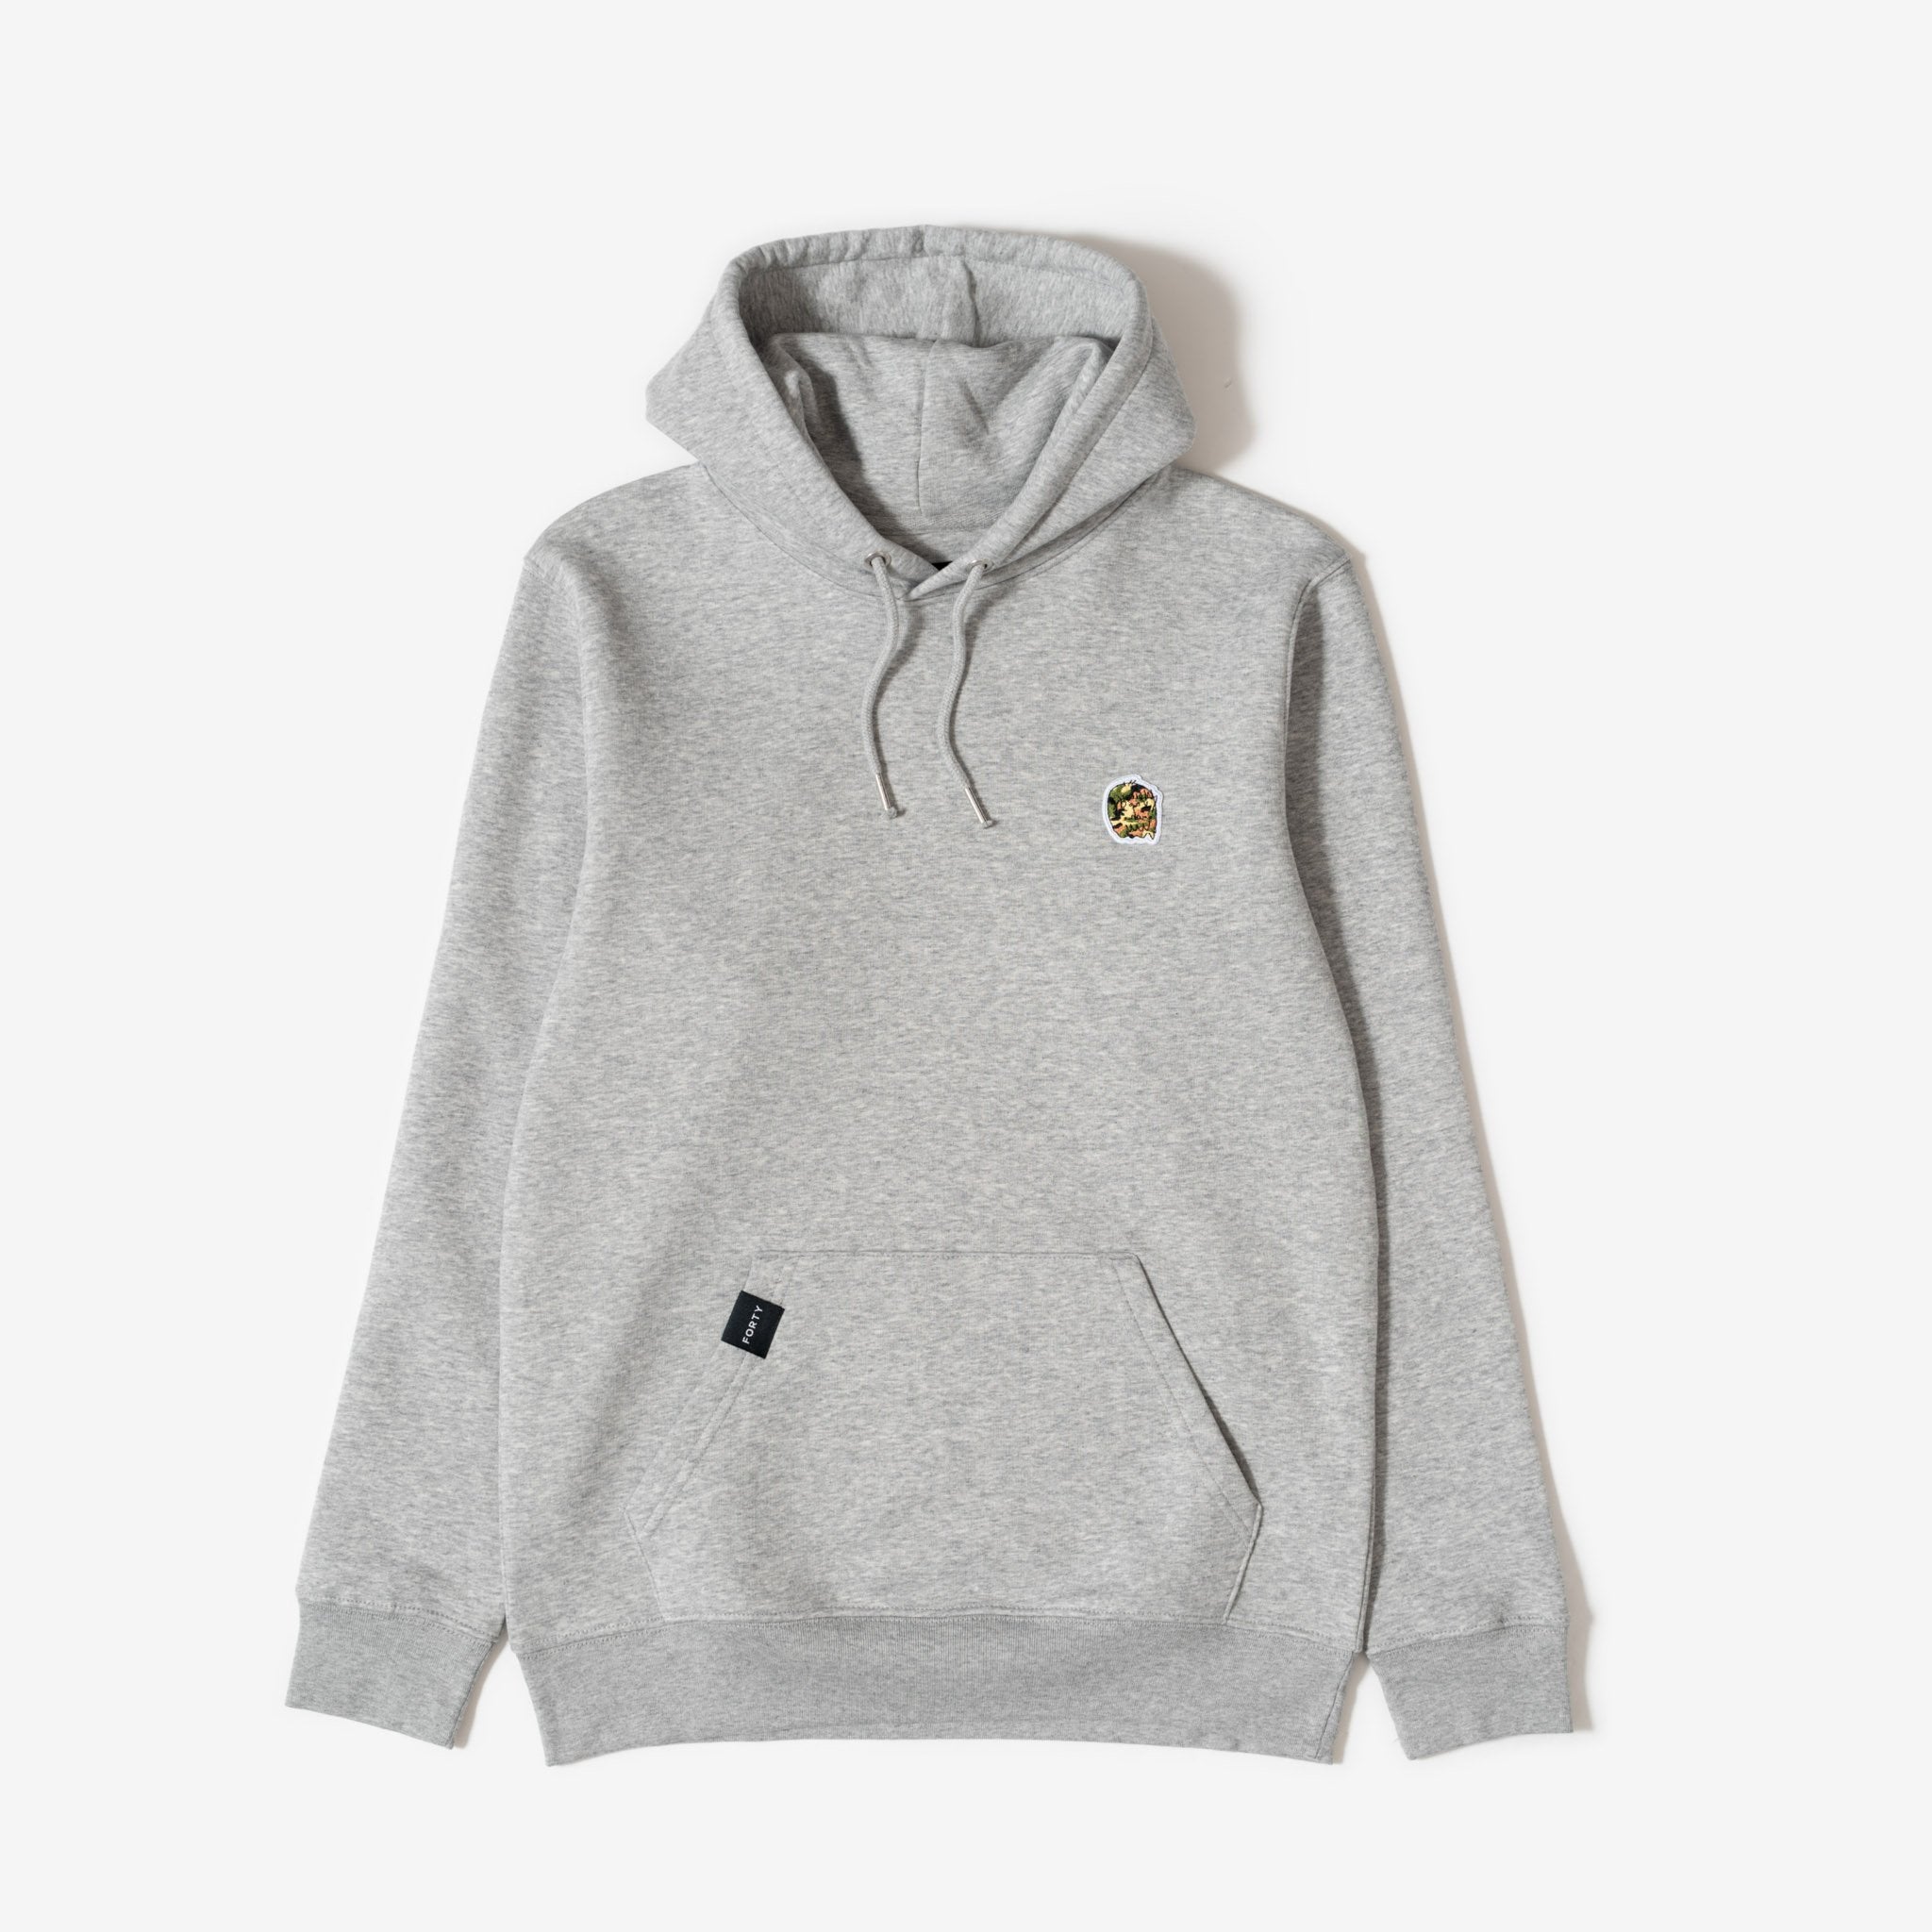 FORTY Tom Hoodie (Grey) xccscss.